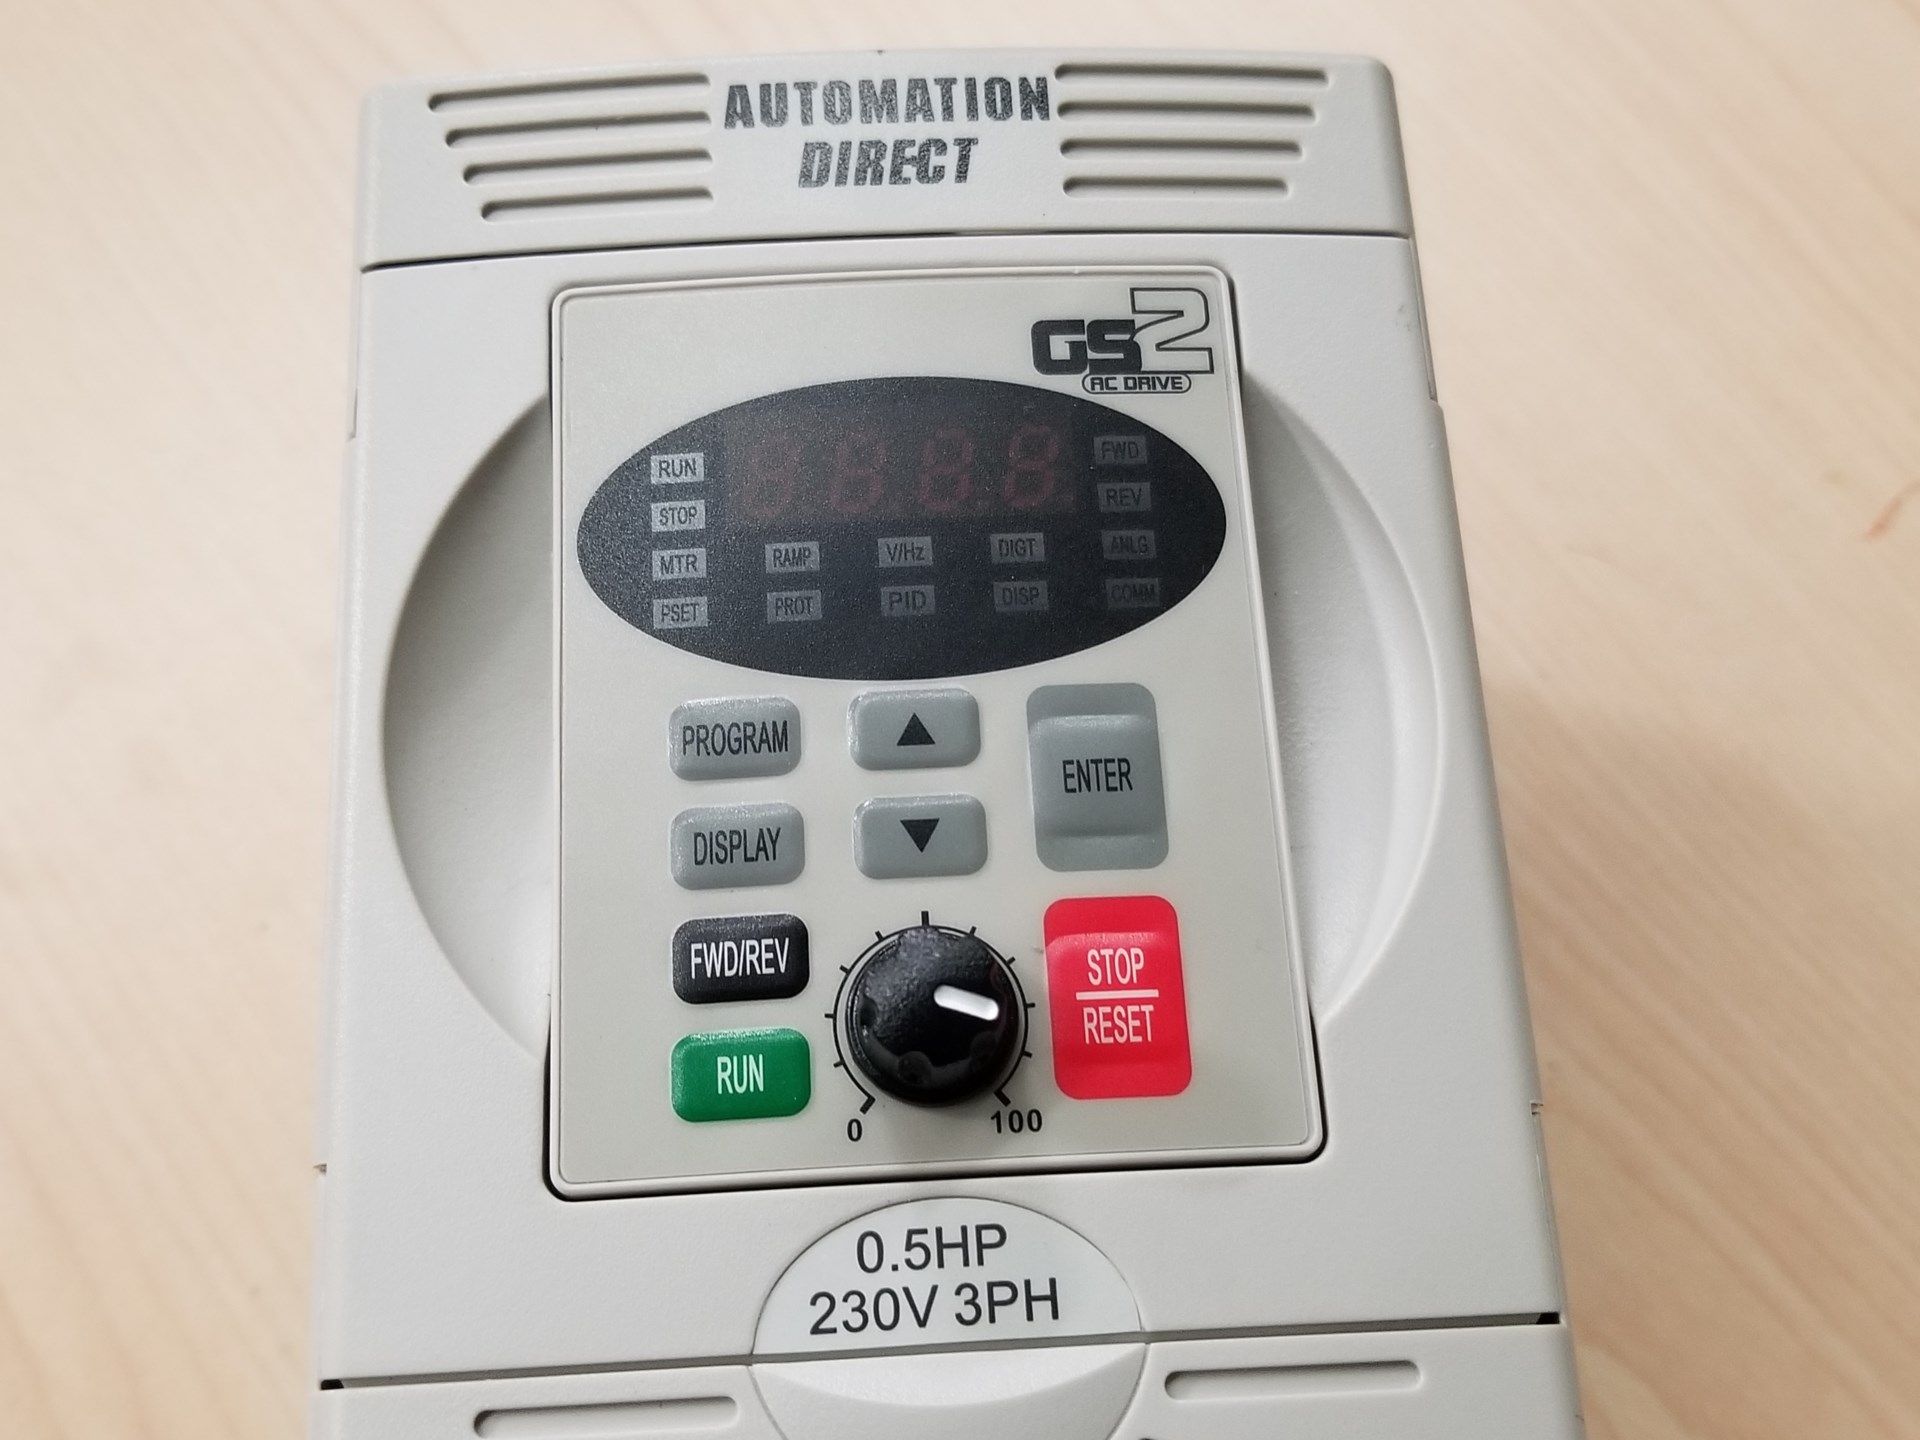 AUTOMATION DIRECT GS2-20P5 0.5HP AC DRIVE - Image 2 of 3